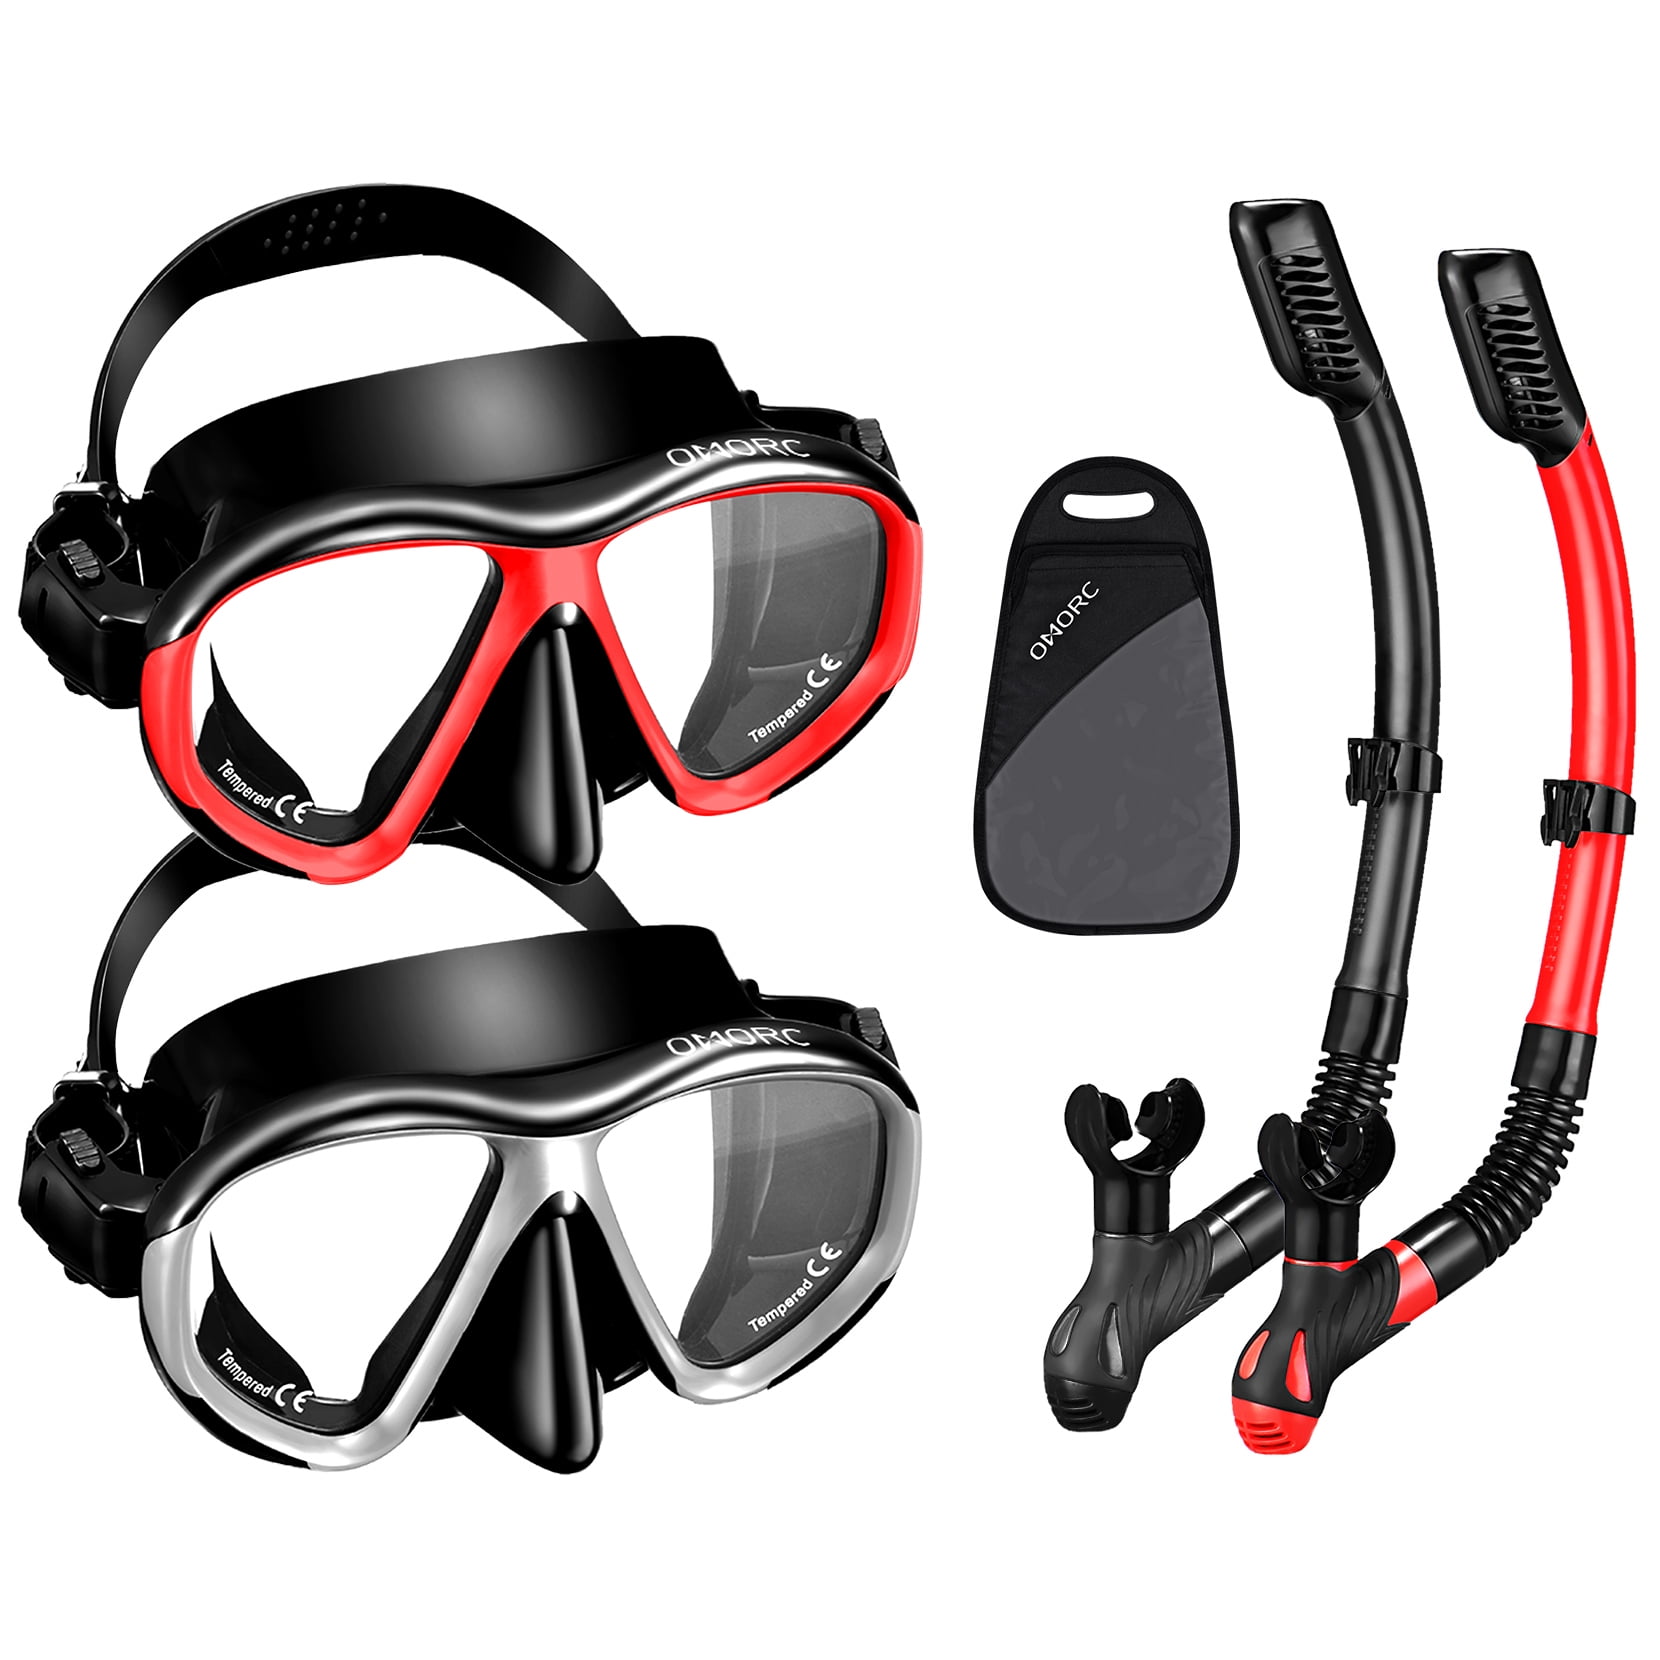 Optical Lens for IST M80 Search M200 Synthesis and ME80 Pro Ear Masks 